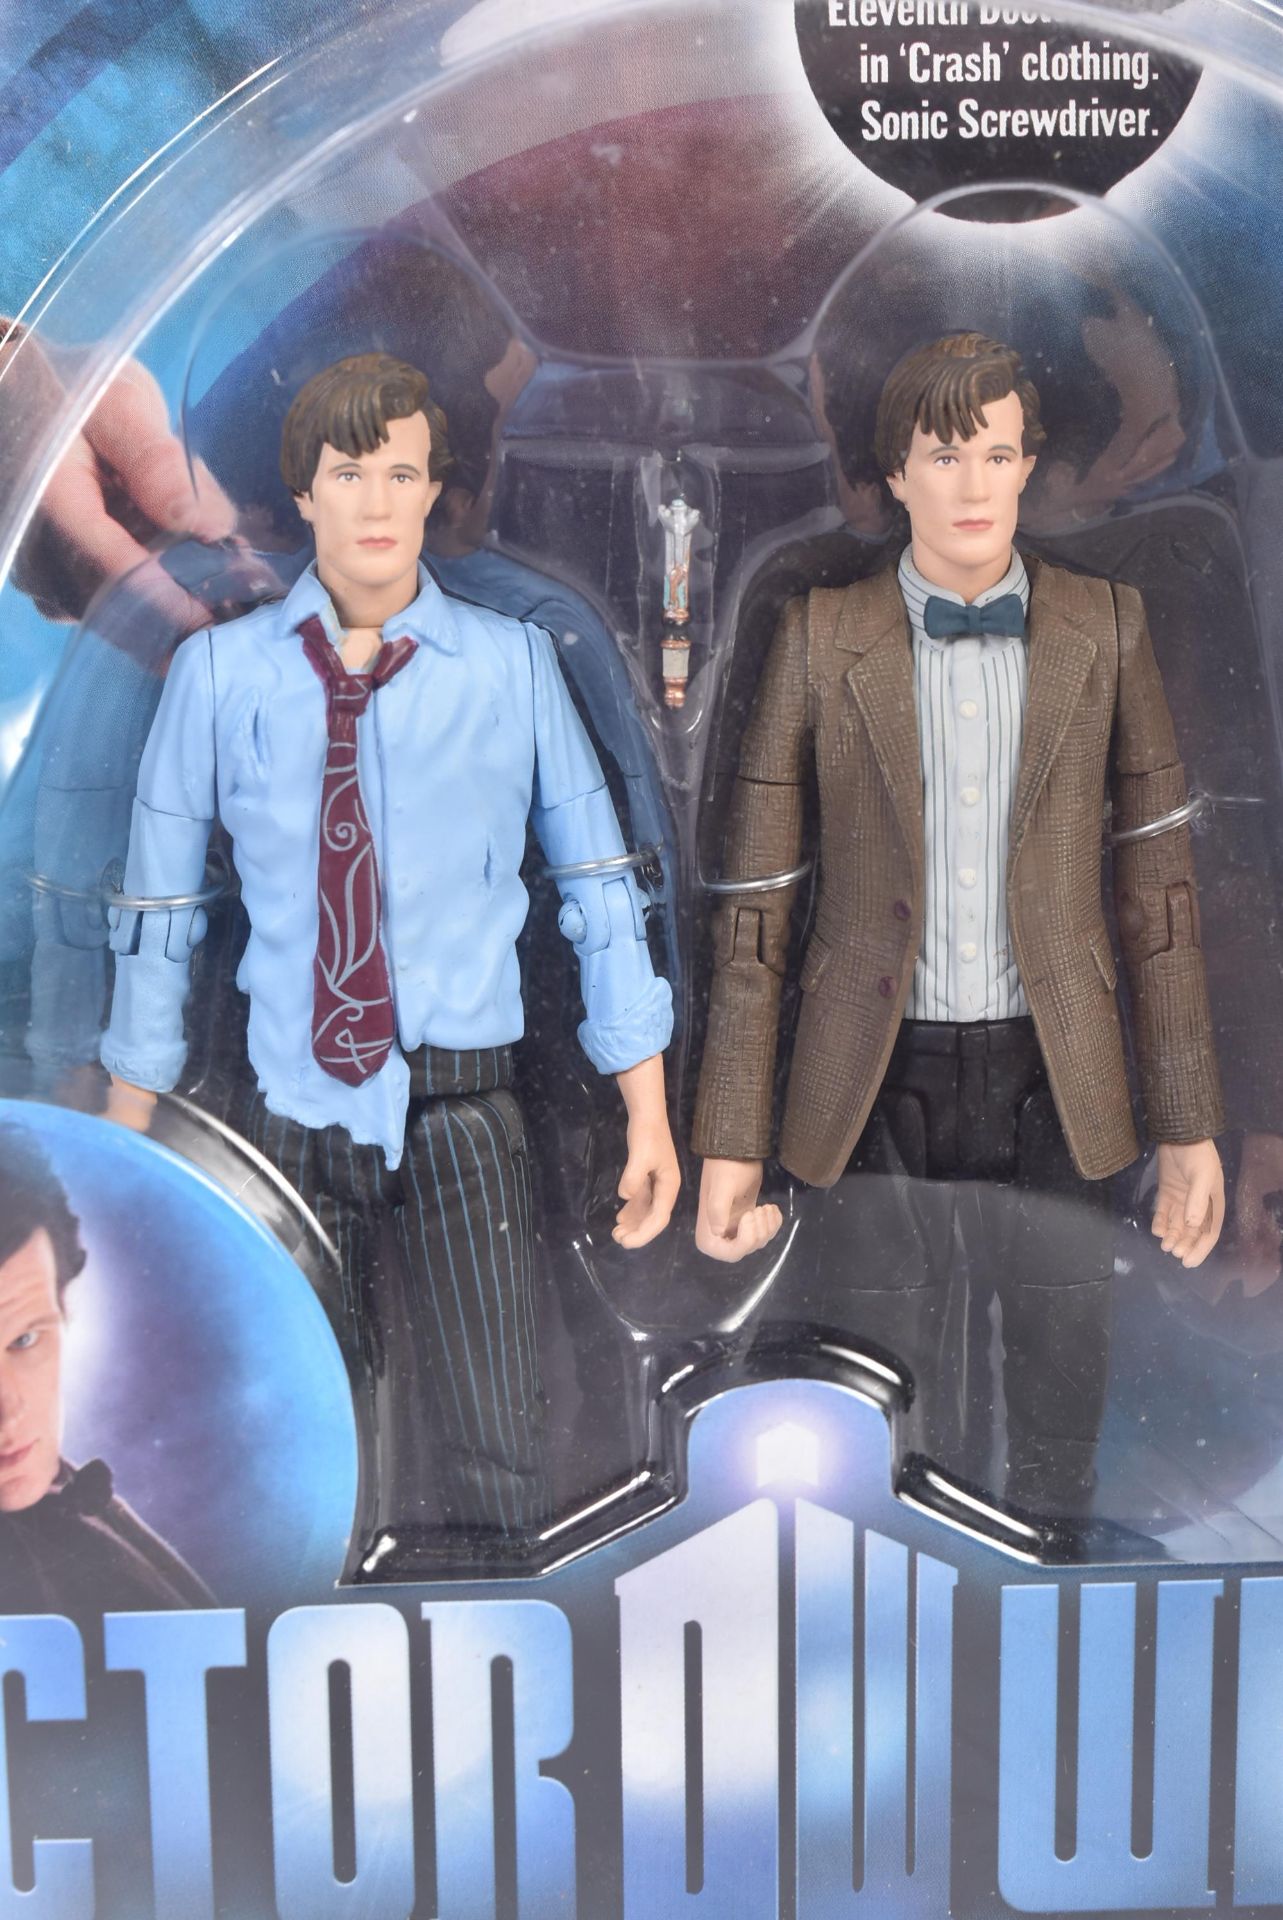 DOCTOR WHO - CHARACTER OPTIONS - X2 ' THE ELEVENTH DOCTOR'S CRASH SET ' TWIN - Image 2 of 4